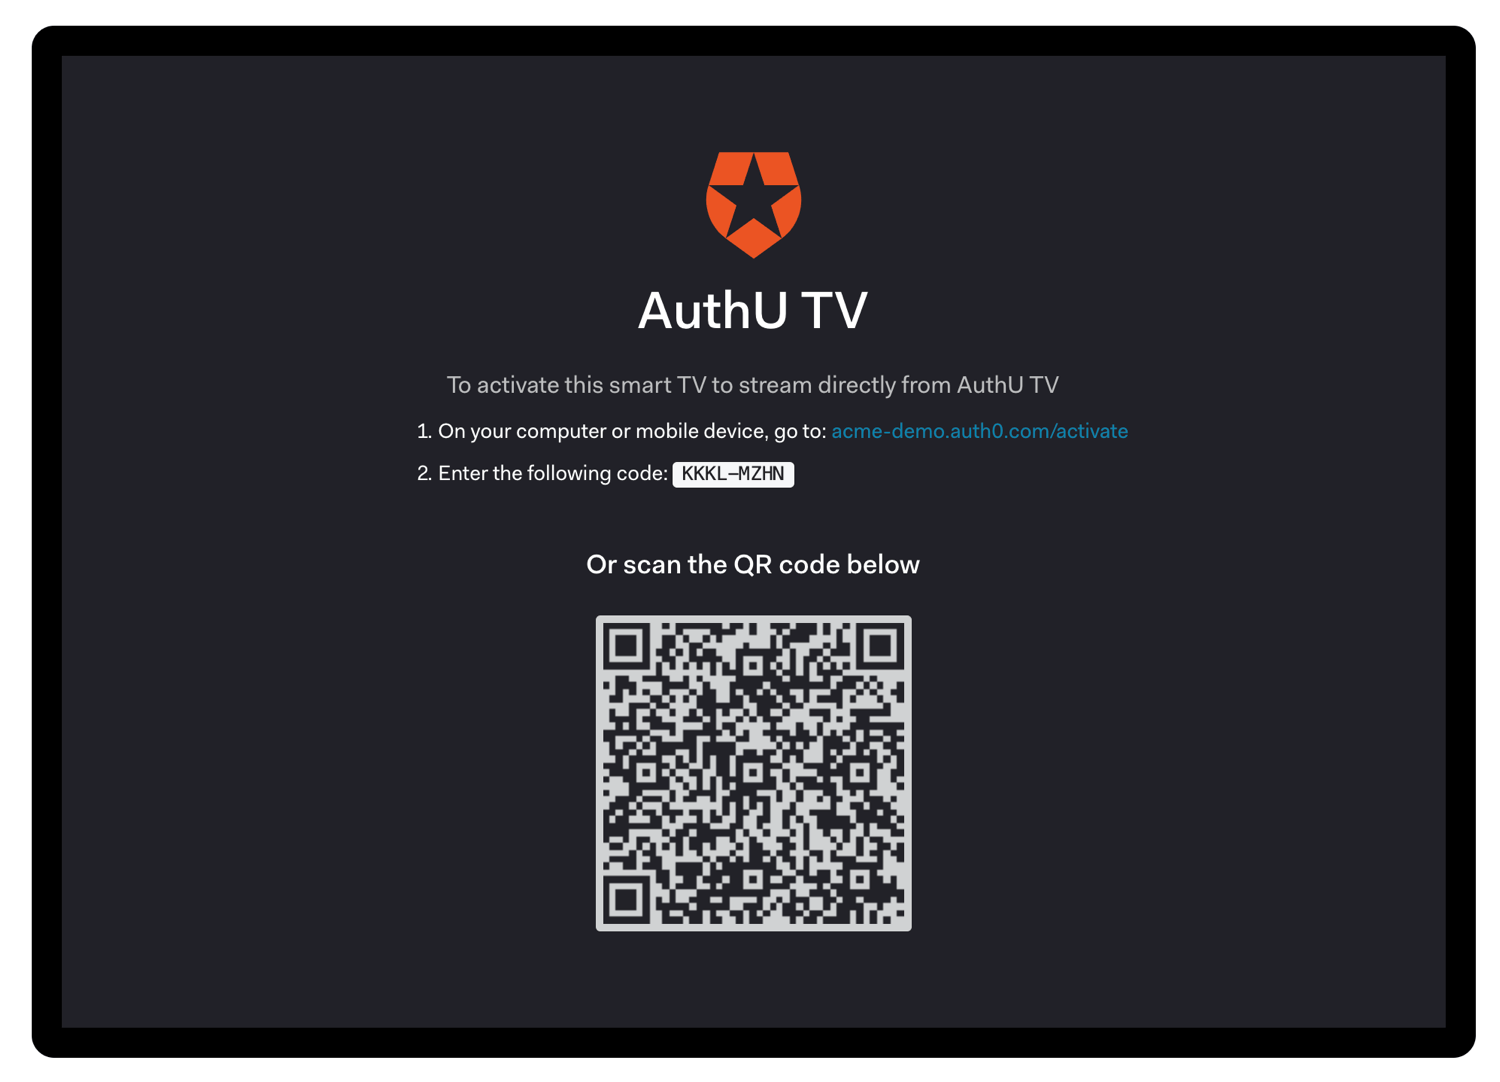 Auth0 Flows Device Authorization Request, sample page showing two activation methods, user_code and QR code